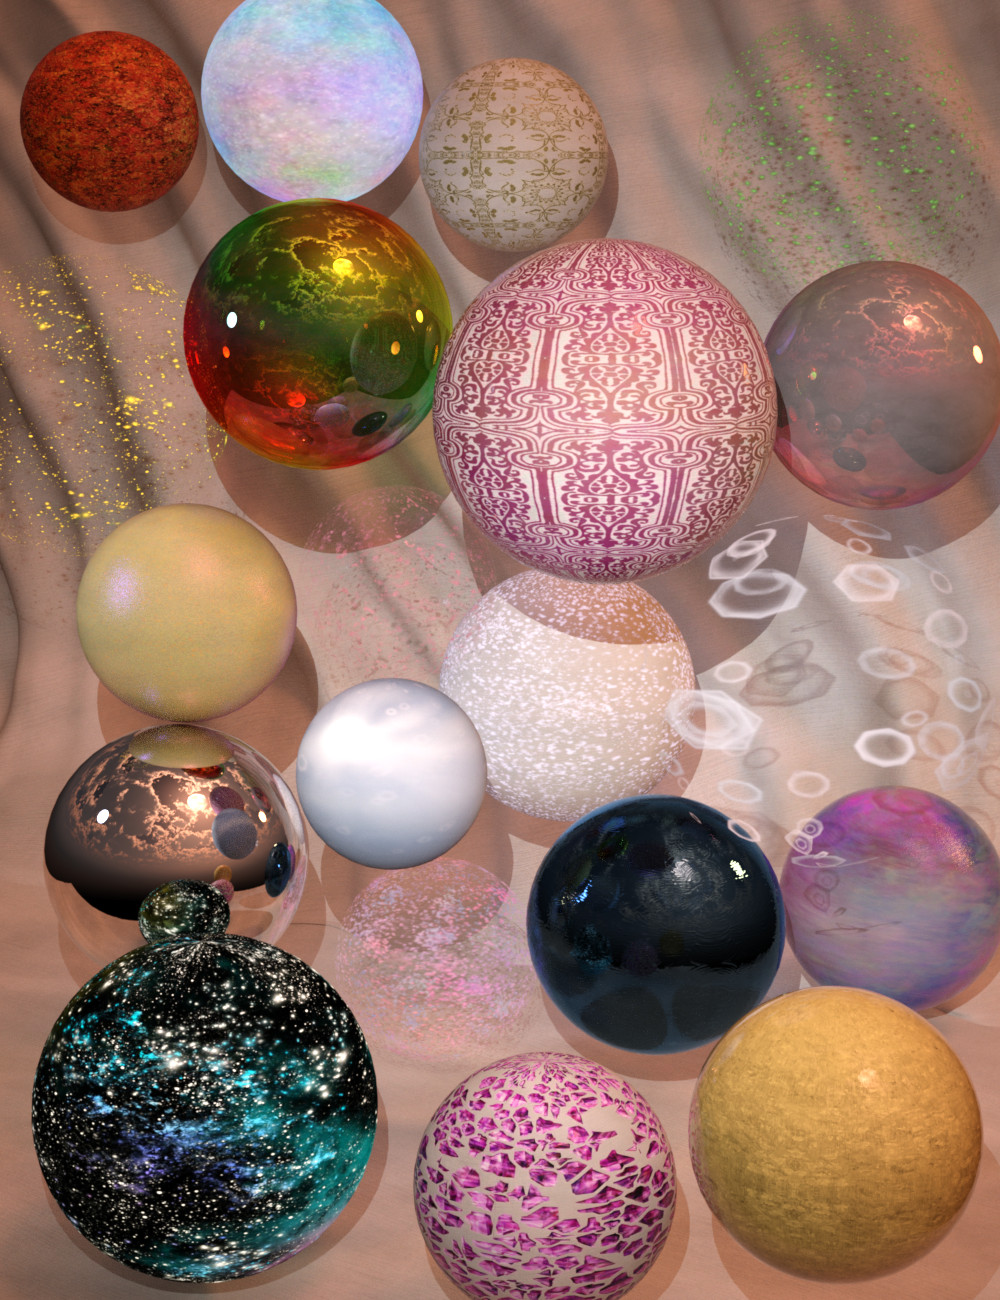 FSL Sparkly Shiny Iray Shaders by: Fuseling, 3D Models by Daz 3D